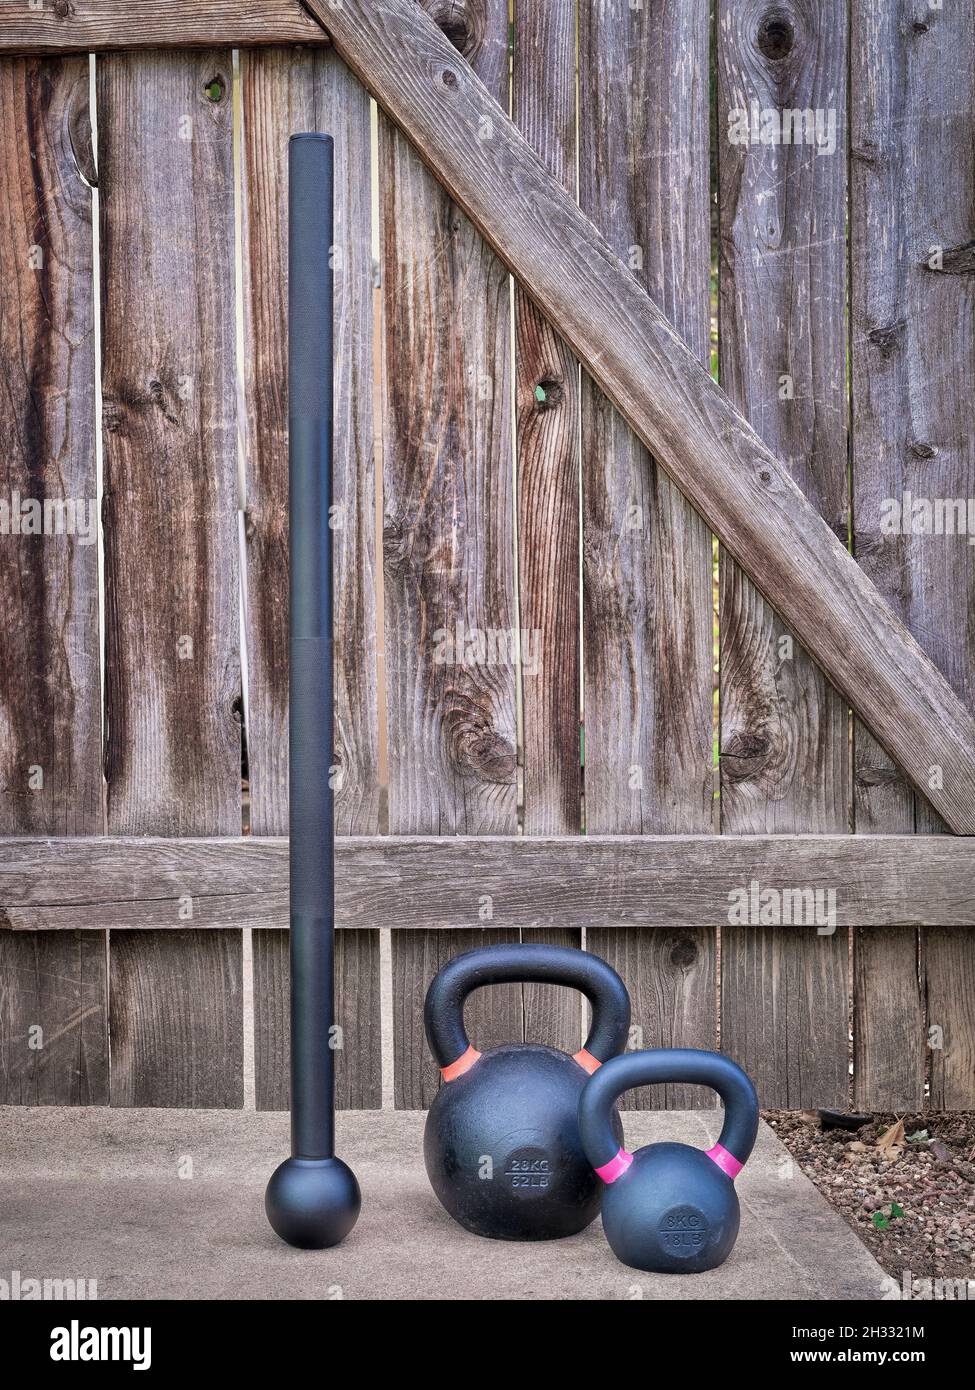 steel mace (macebell) and iron kettlebells against a rustic wooden gate in  a backyard, home functional fitness concept using unconventional equipment  Stock Photo - Alamy